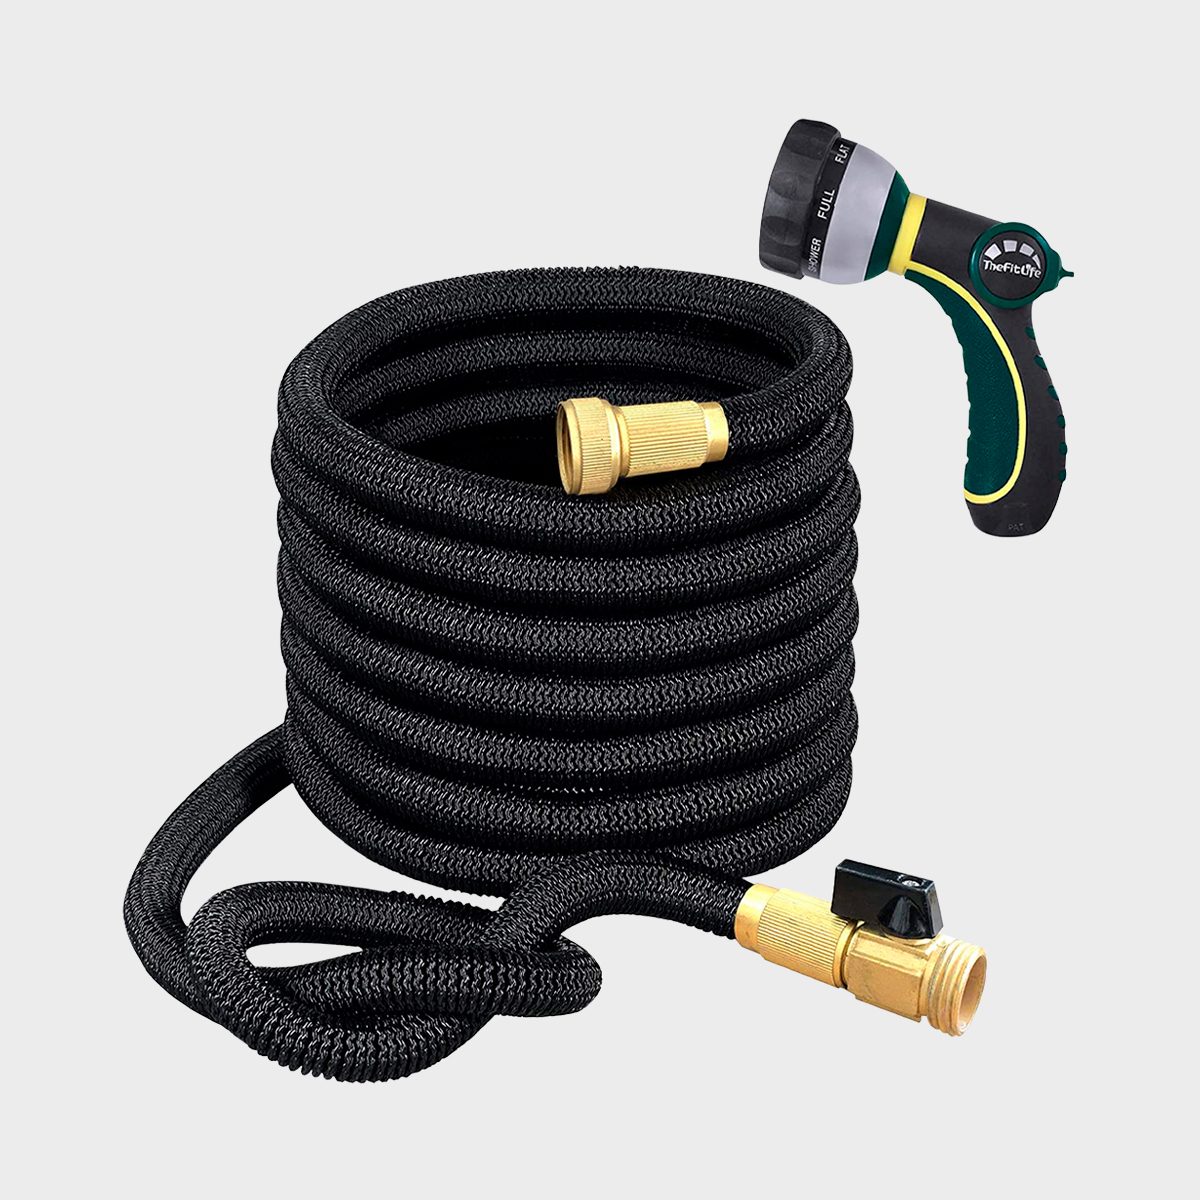 Fitlife Expandable Garden Hose Review: We Approve!